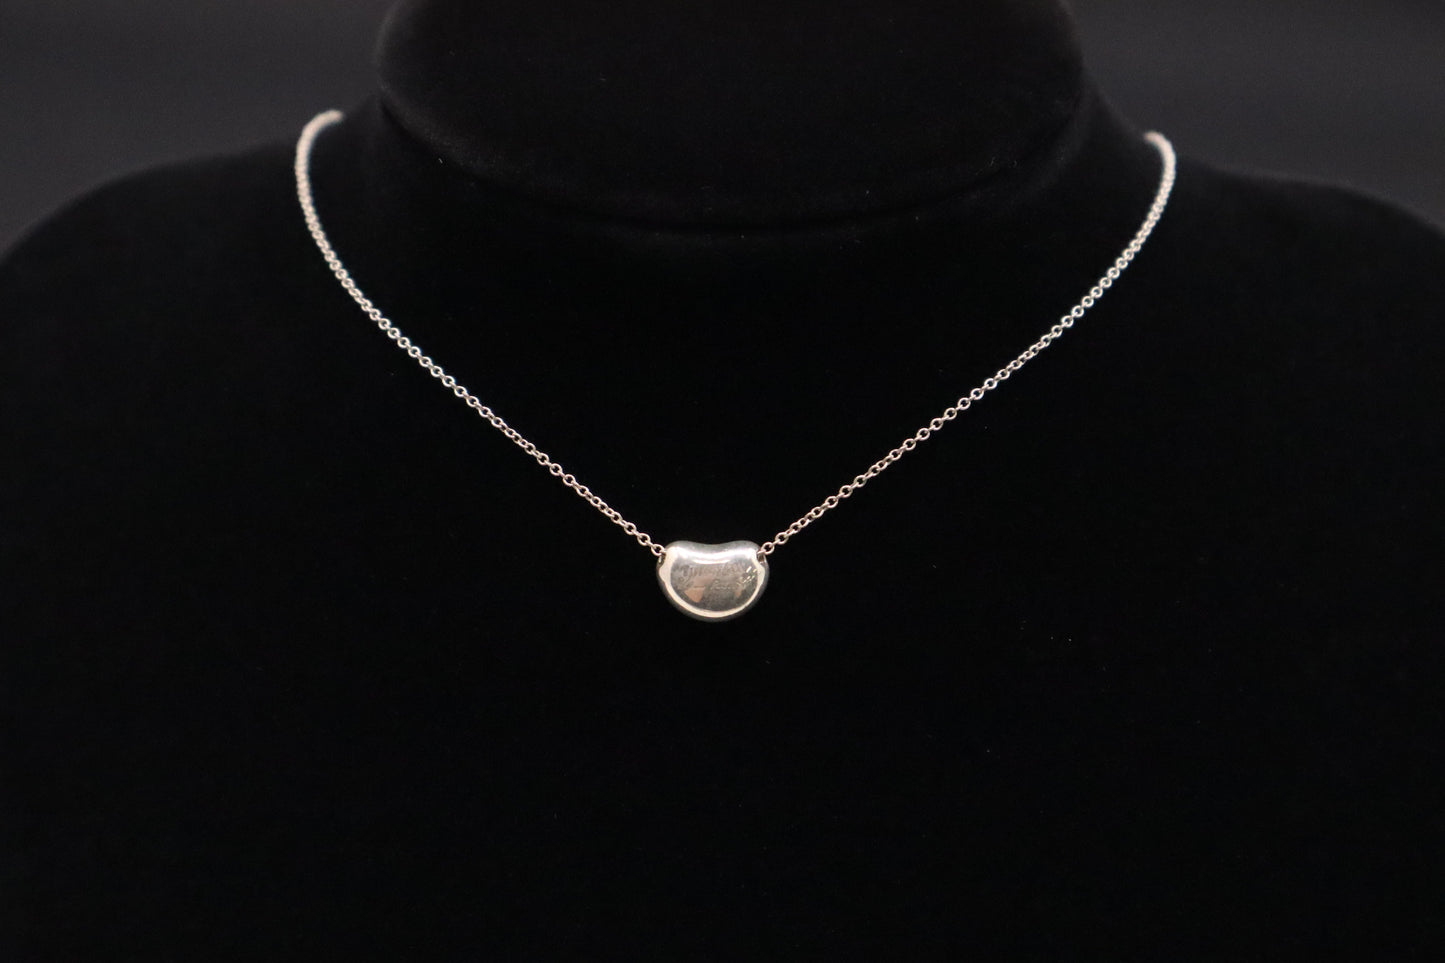 Tiffany & Co. Bean Necklace in Sterling Silver